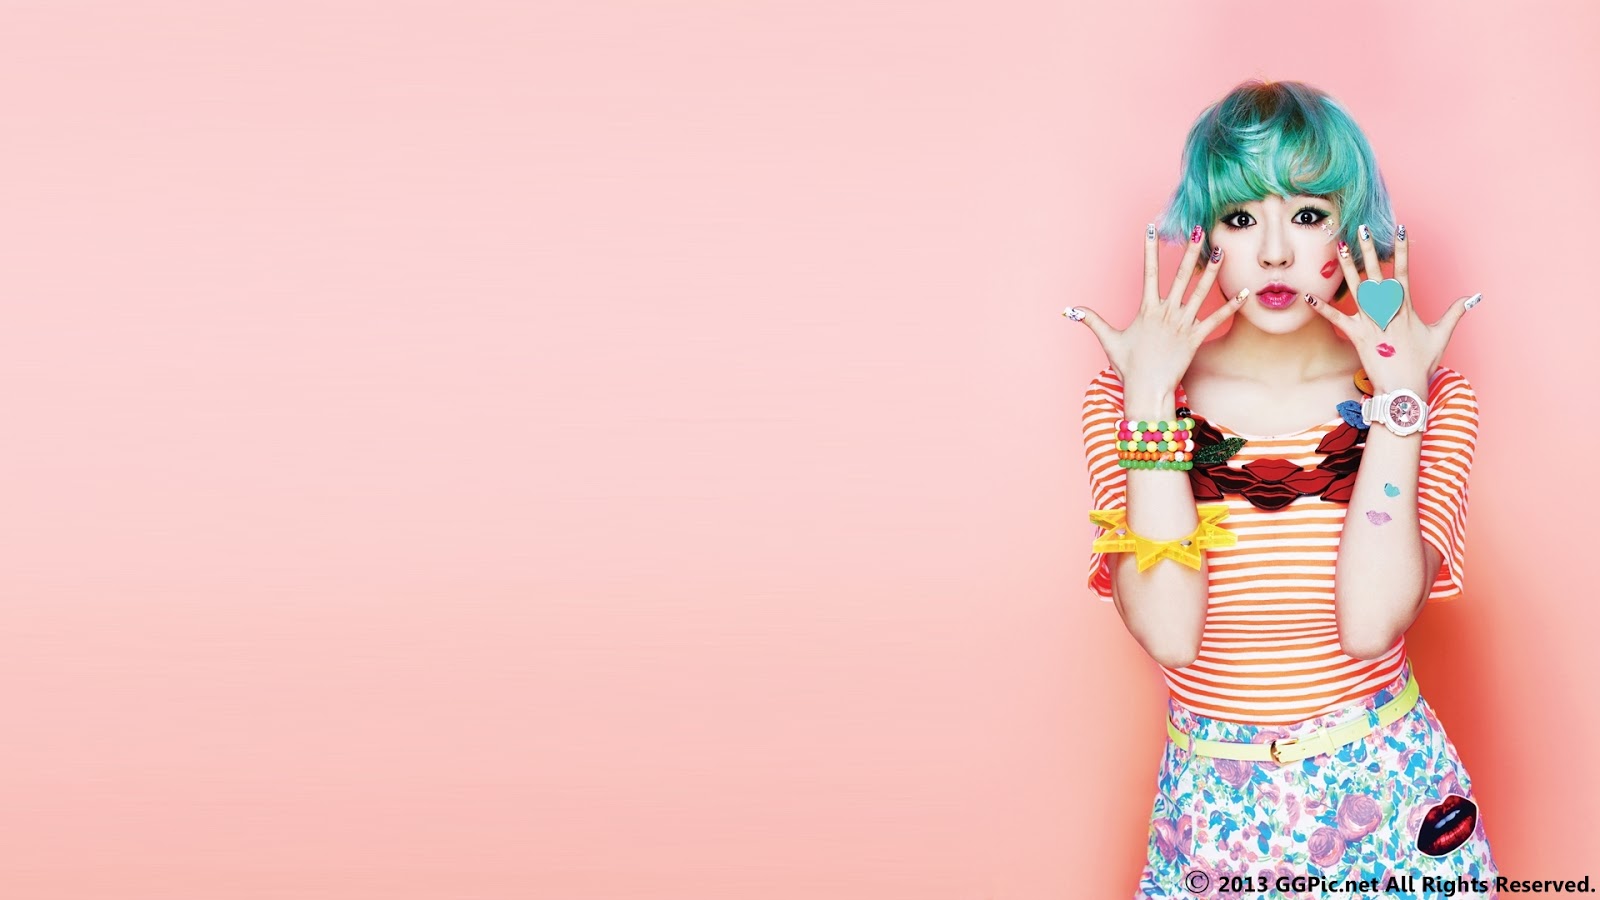 Sunny Kiss Me Baby-g By Casio - Girls Generation Sunny Green - HD Wallpaper 